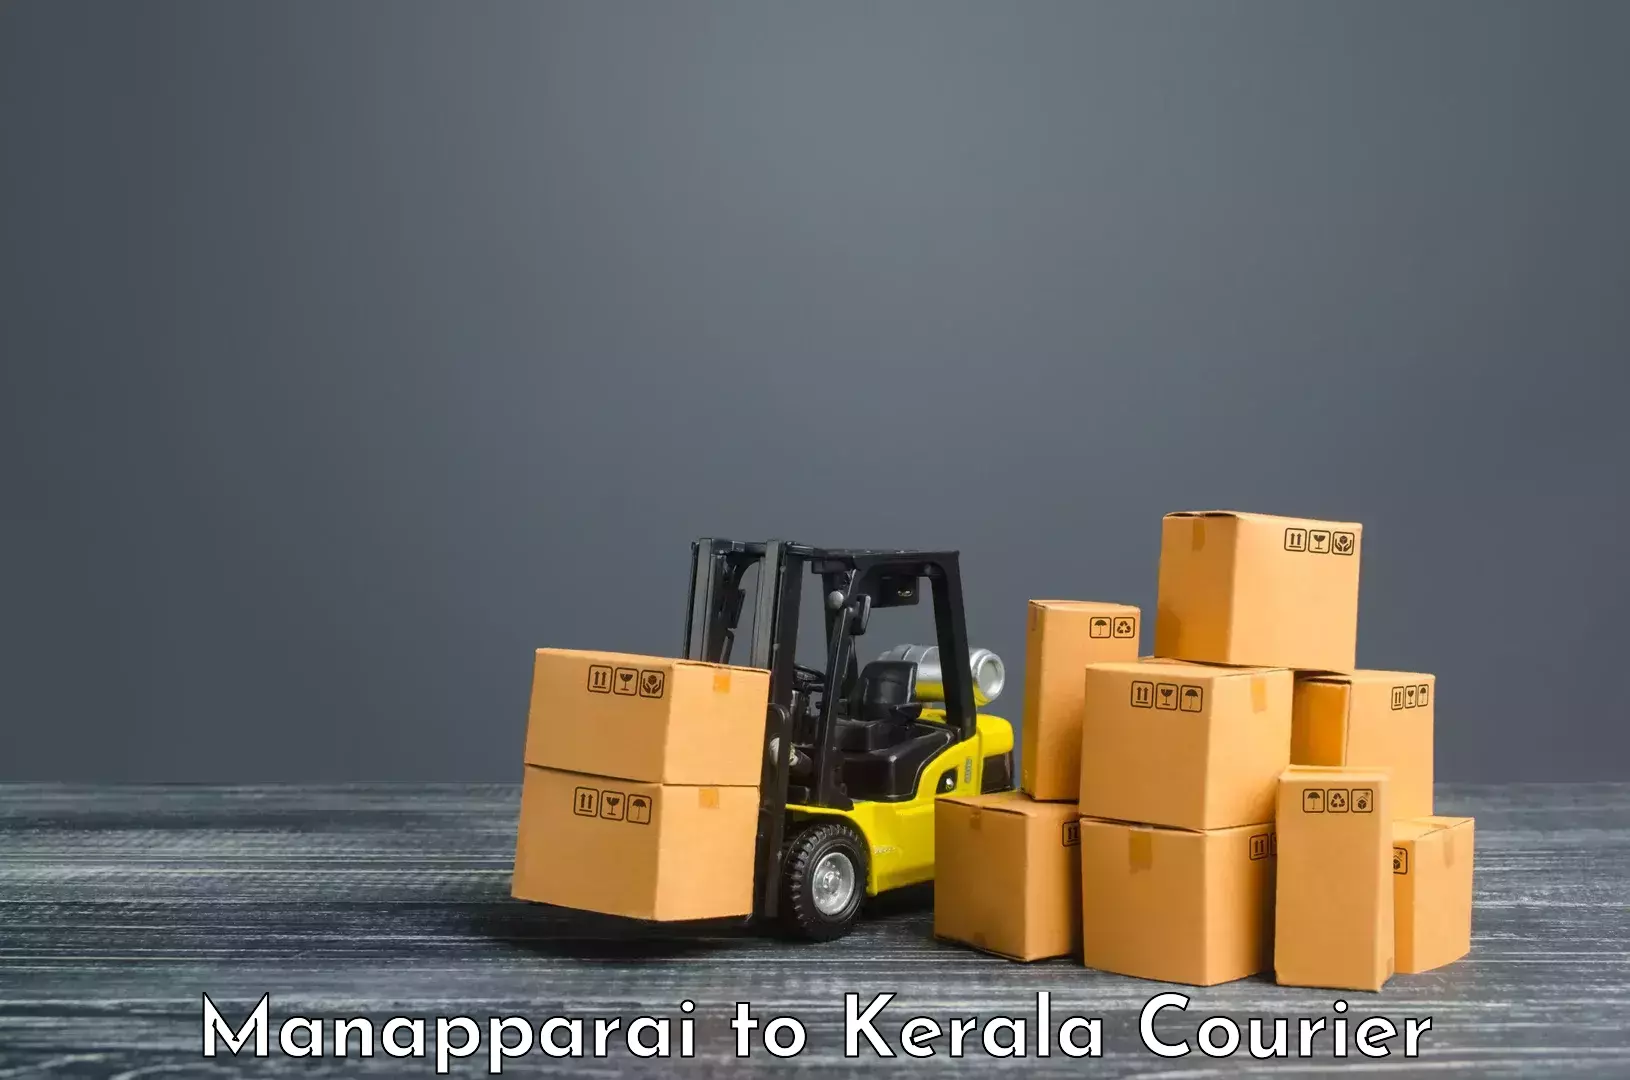 Package delivery network Manapparai to Kerala